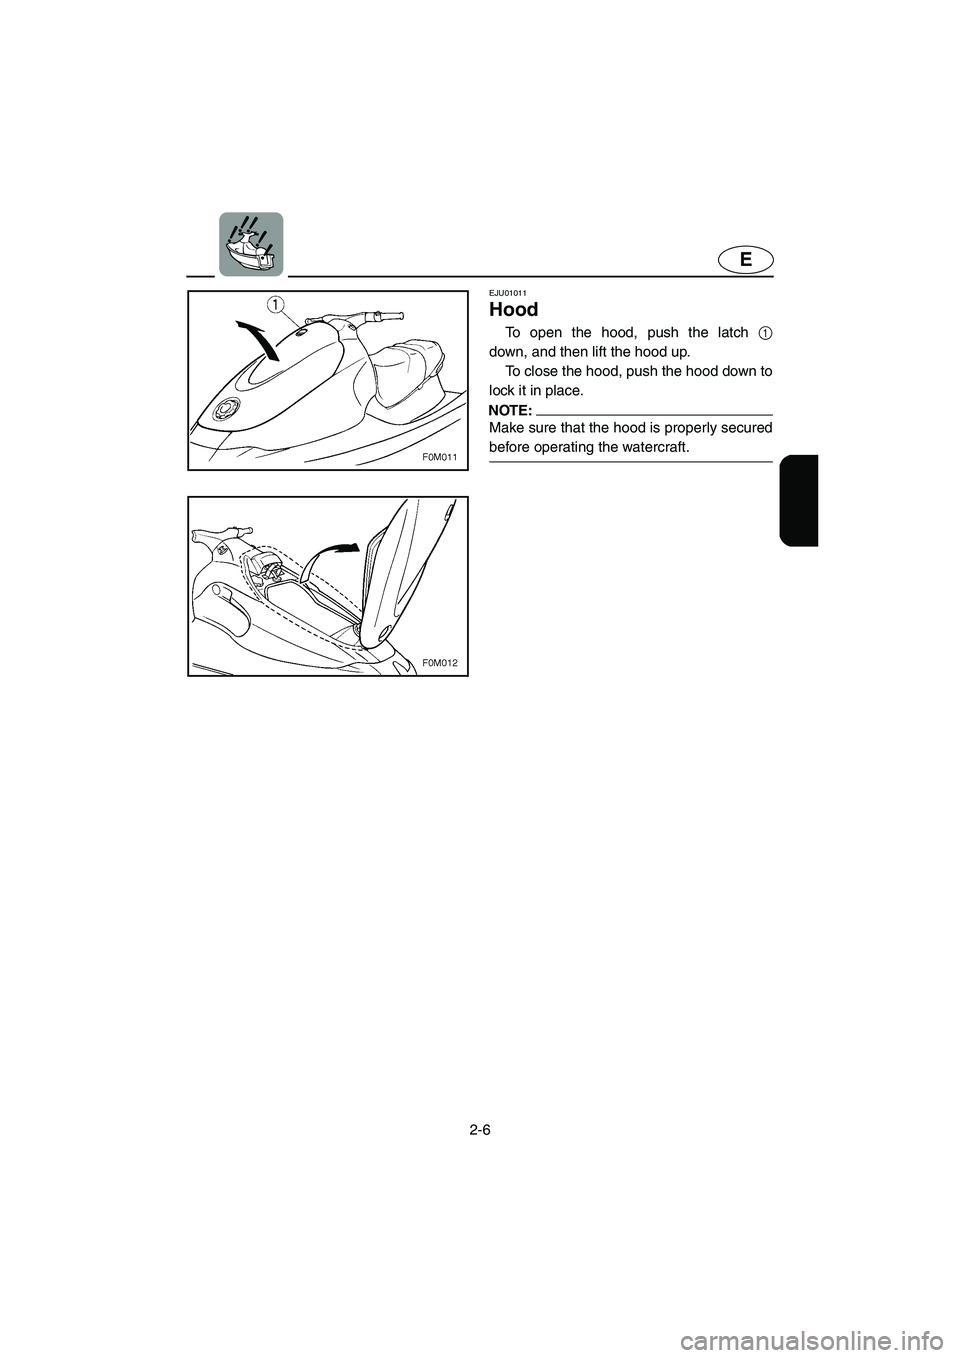 YAMAHA XL 700 2003  Owners Manual 2-6
E
EJU01011 
Hood  
To open the hood, push the latch 1
down, and then lift the hood up. 
To close the hood, push the hood down to
lock it in place. 
NOTE:@ Make sure that the hood is properly secur